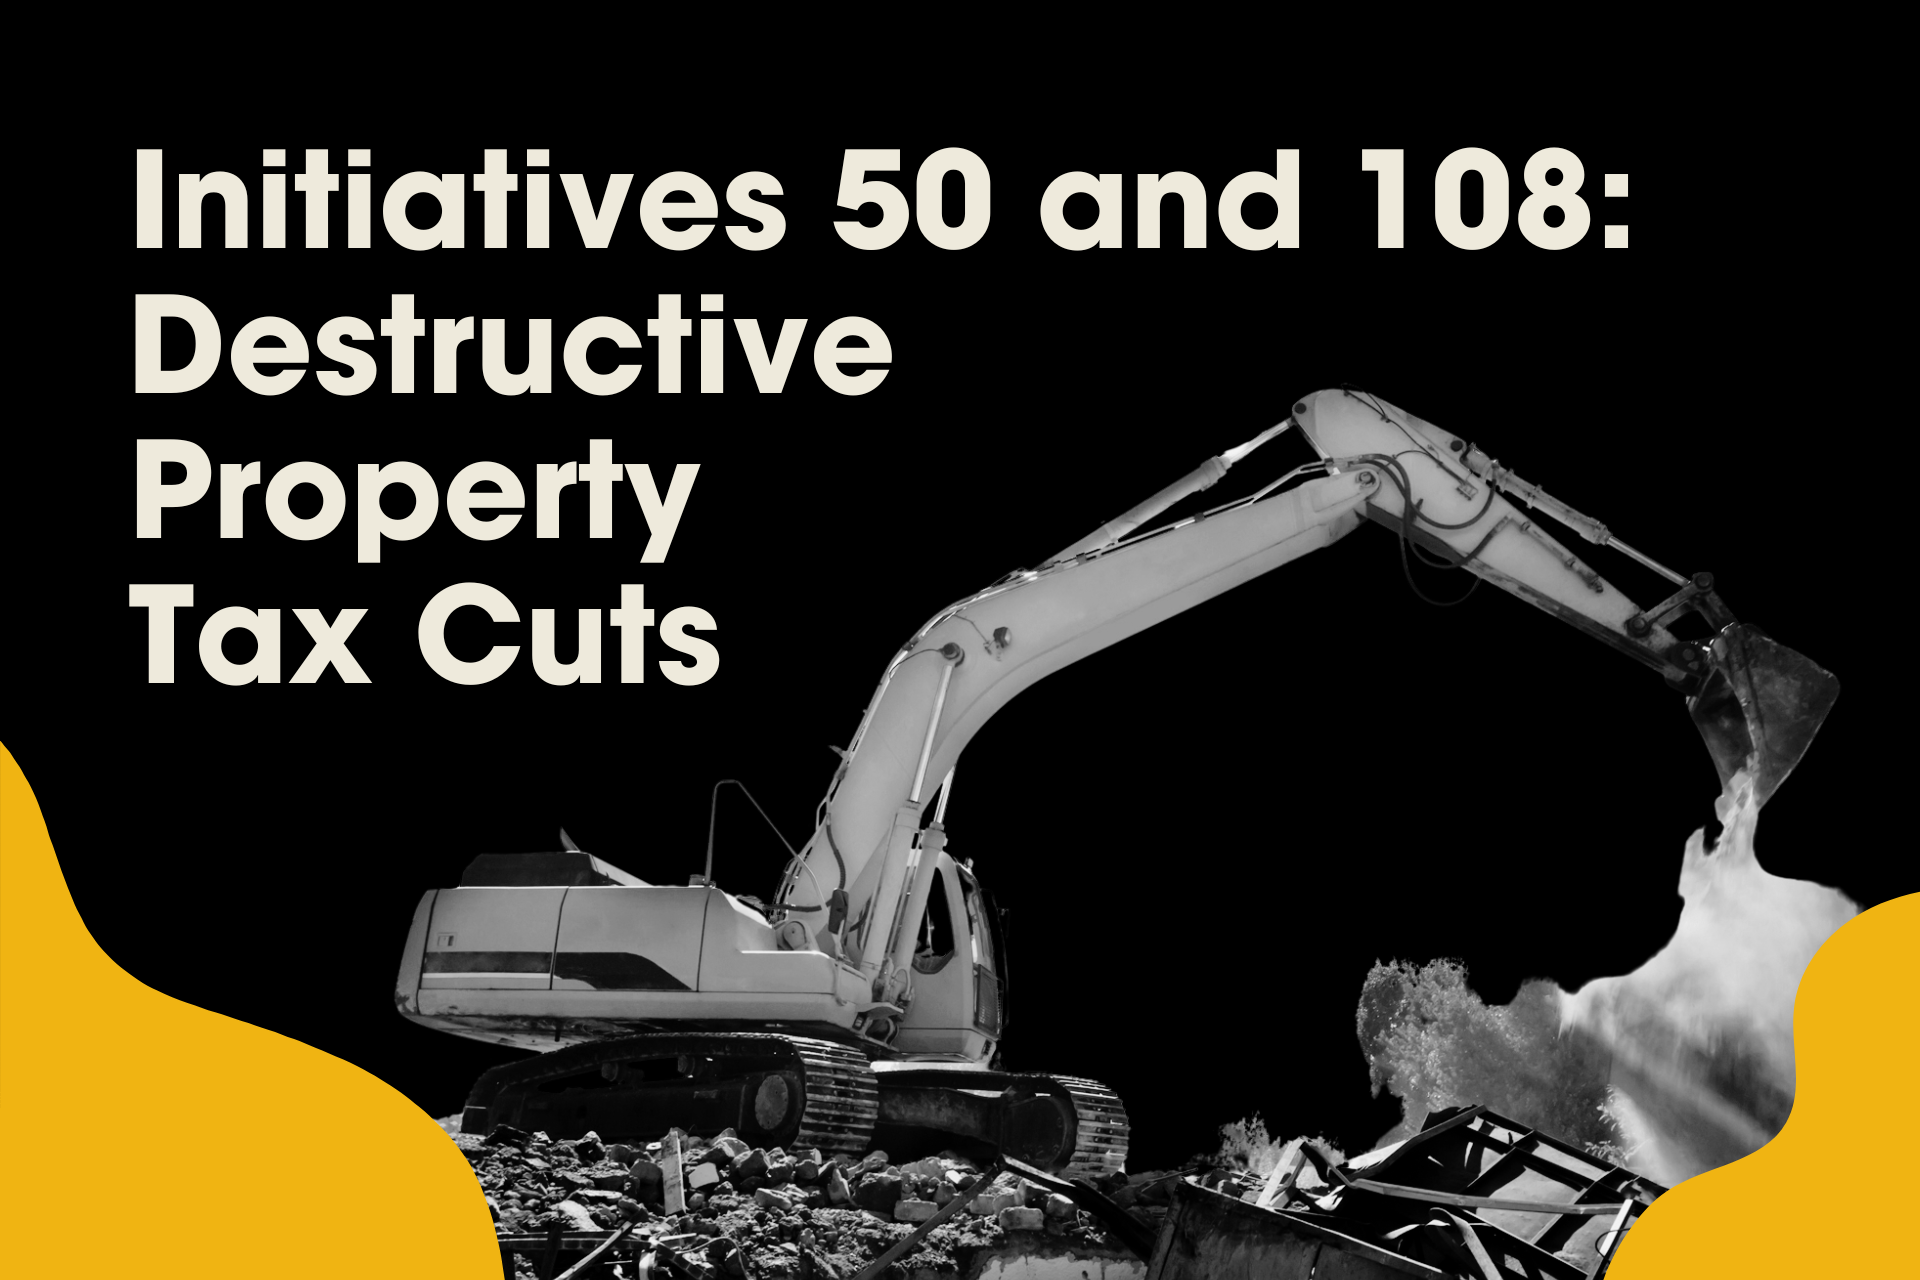 image shows bulldozer digging and says: Initiatives 50 and 108: destructive property tax cuts